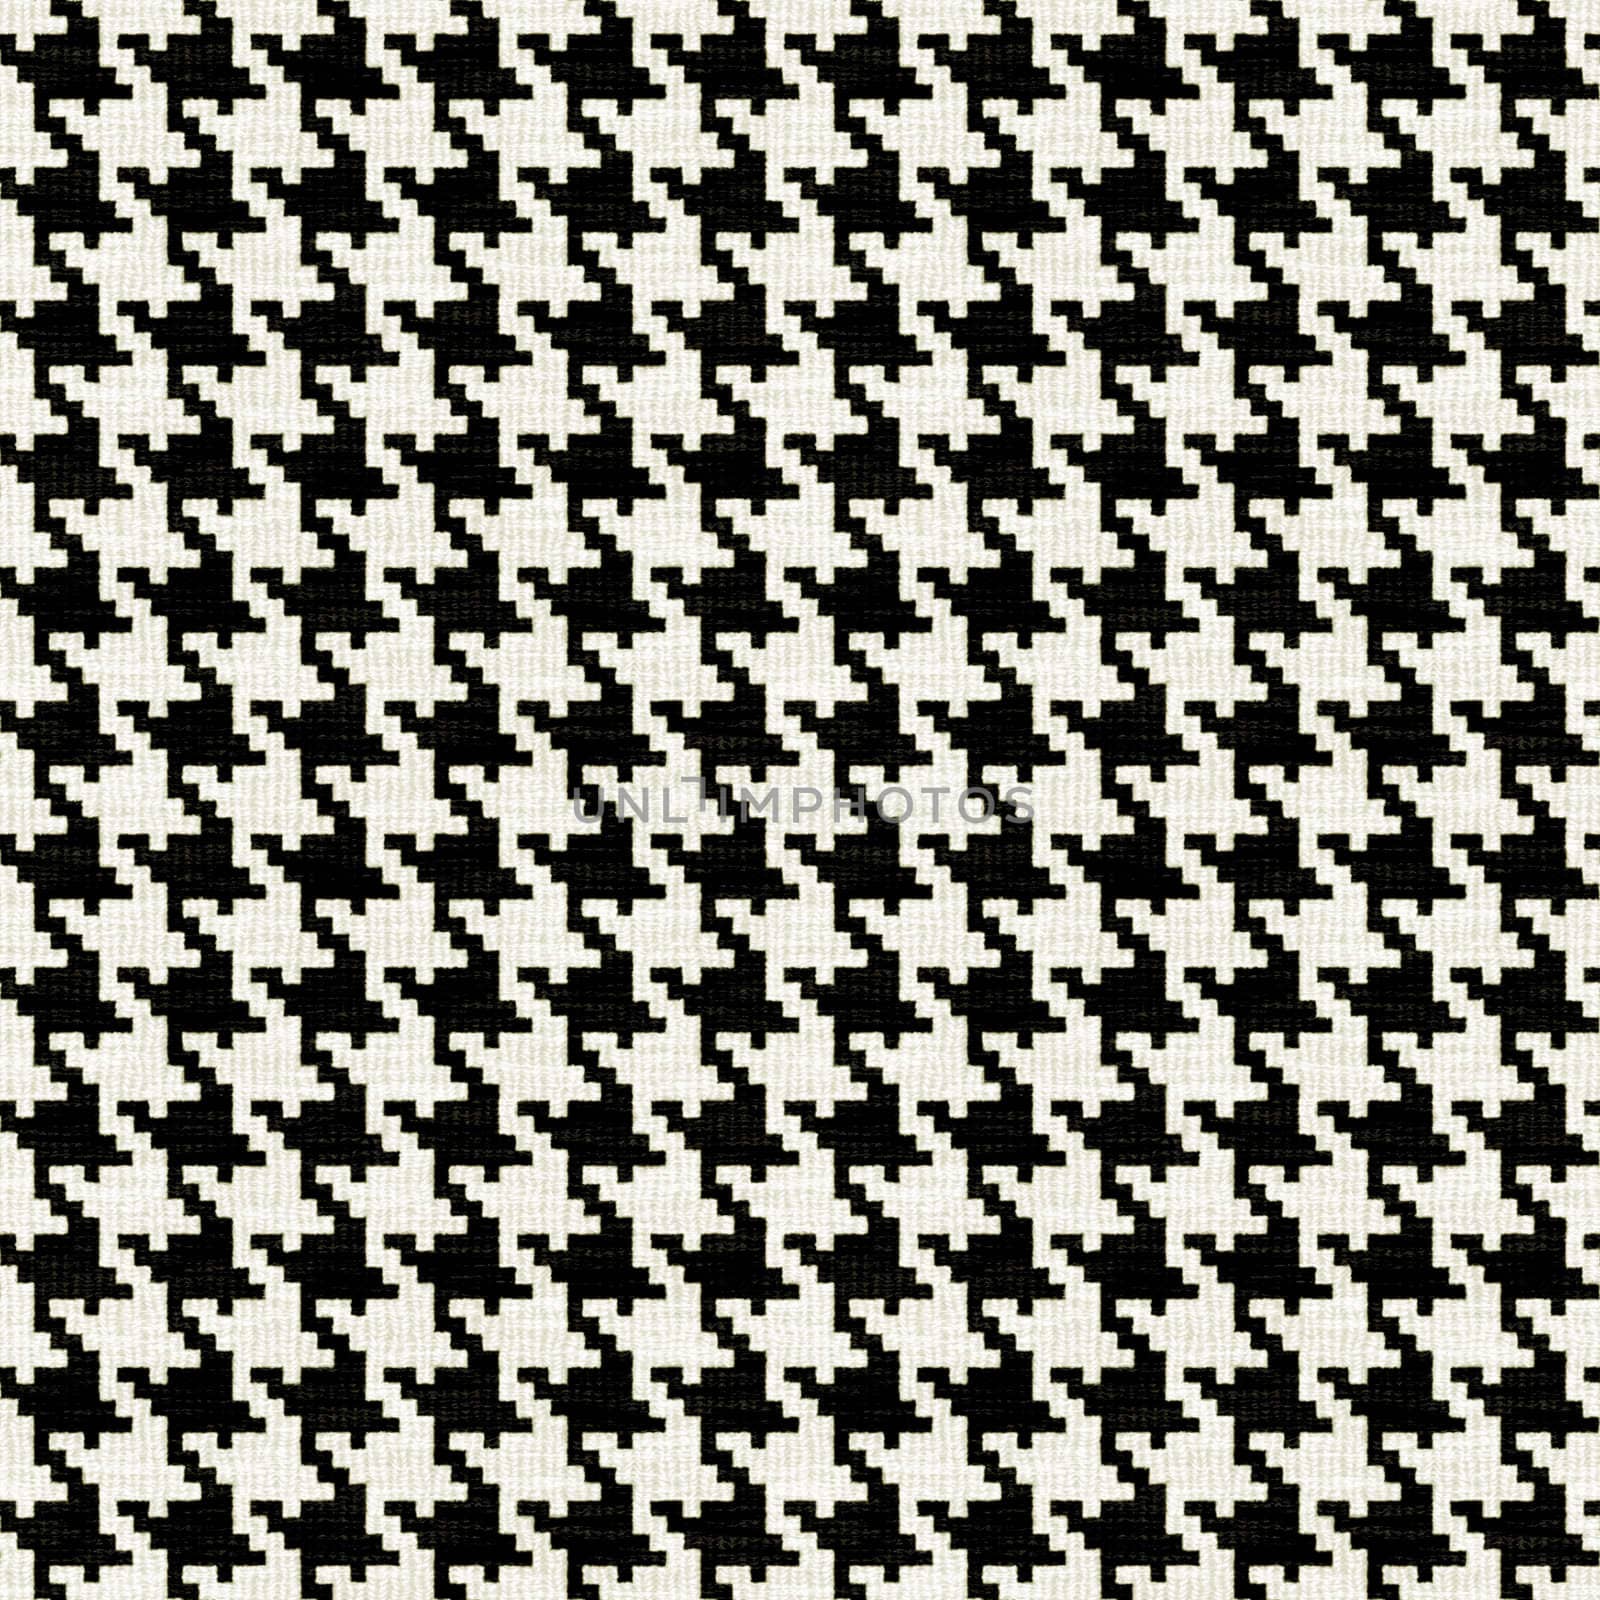 A black and white seamless hounds tooth pattern or texture with lots of detail.